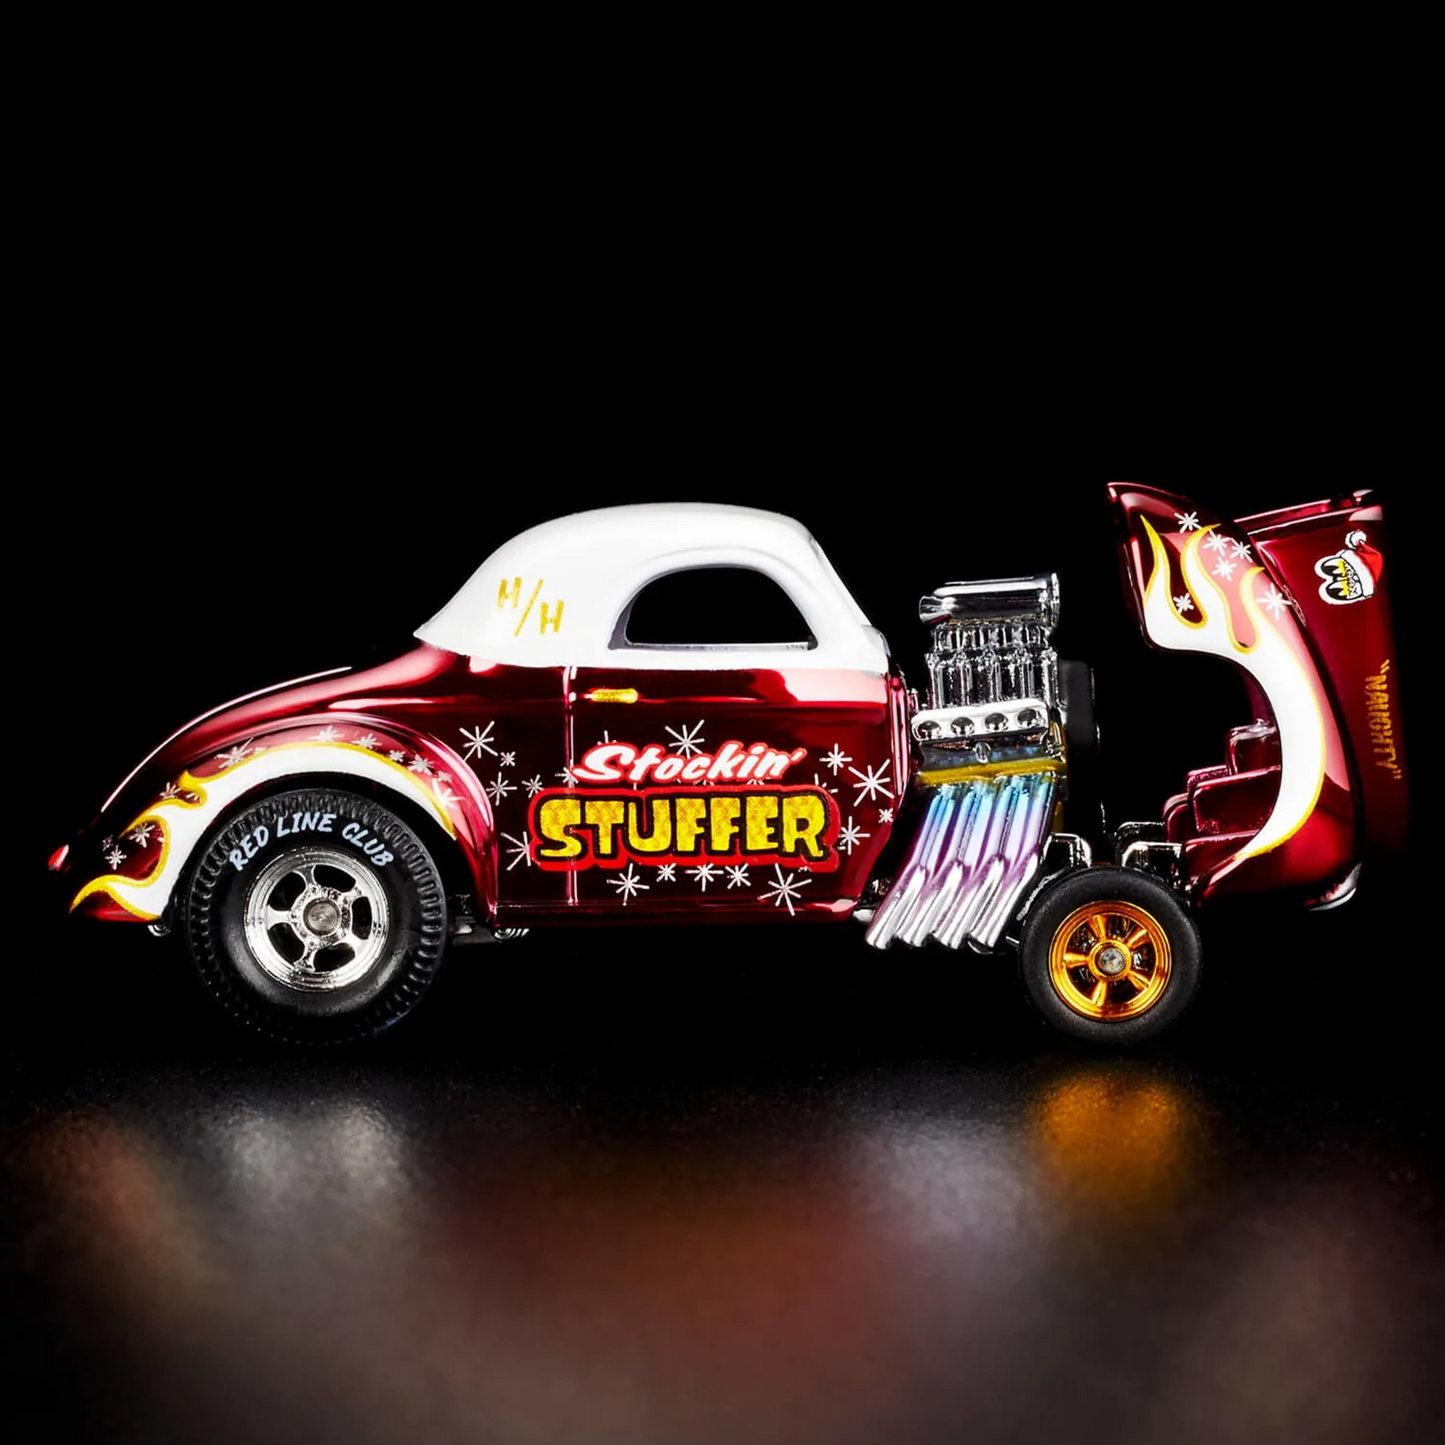 Hot Wheels 2022 - RLC Exclusive / Holiday Car / Stocking Stuffer - '41 Willys Gasser - Spectraflame Red - Metal/Metal & Real Riders - Acrylic Display Case - Limited to 30,000